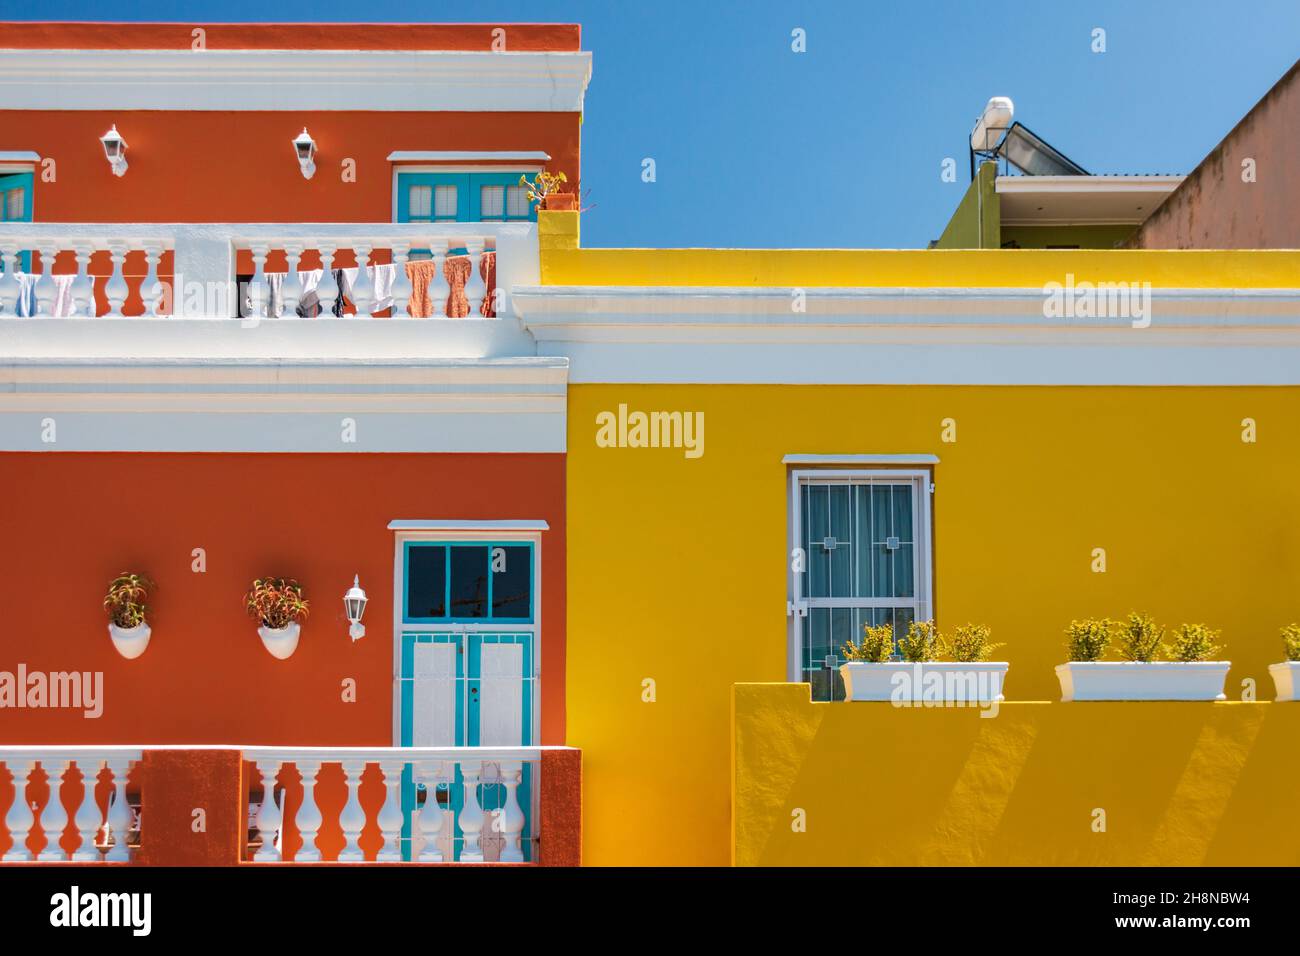 Colorful facades of old houses in orange and yellow, Bo Kaap Malay Quarter, Cape Town, South Africa Stock Photo